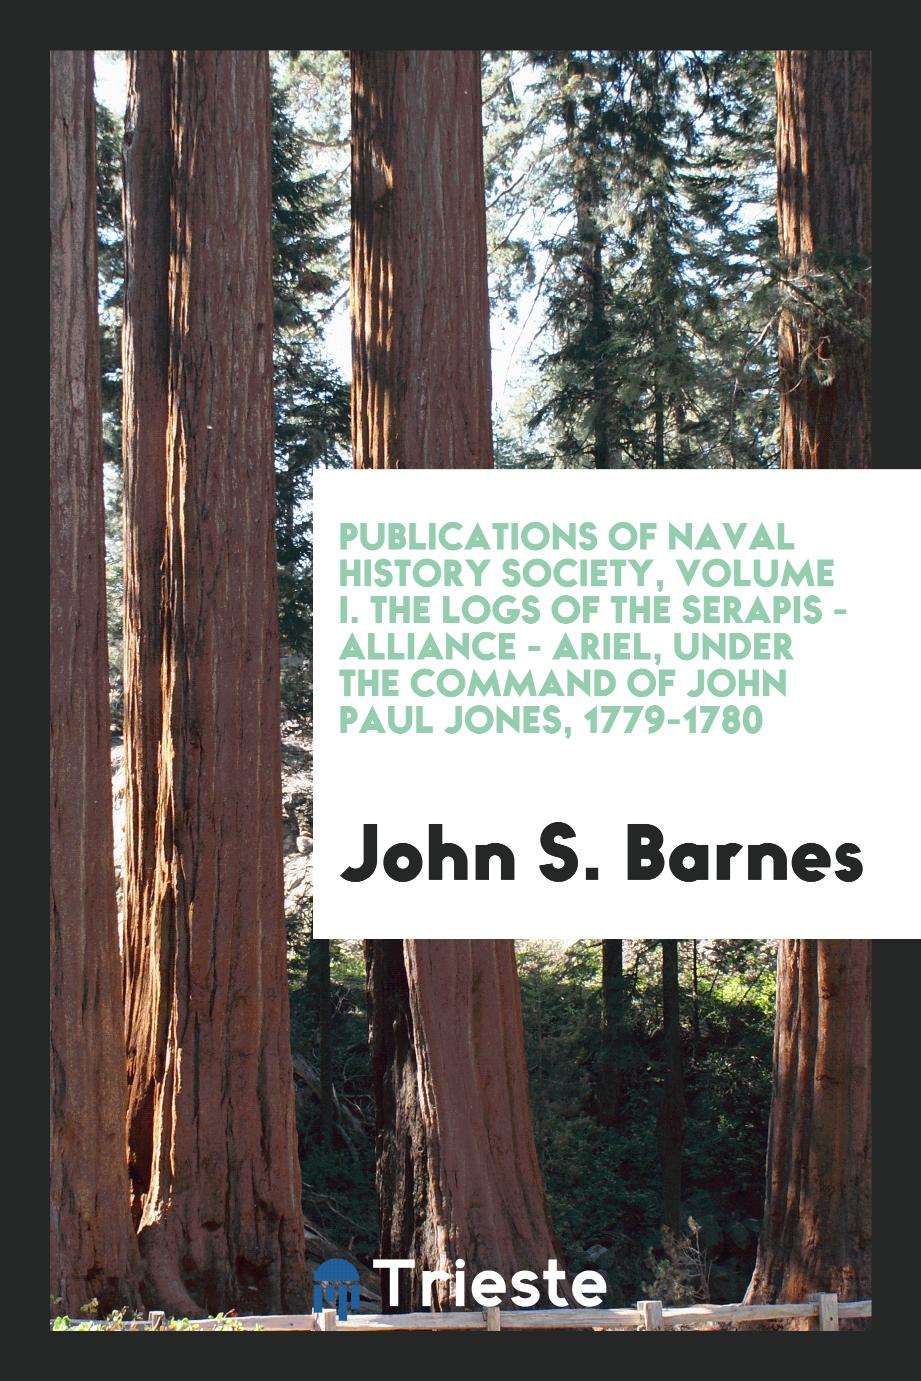 Publications of Naval History Society, Volume I. The Logs of the Serapis - Alliance - Ariel, under the Command of John Paul Jones, 1779-1780